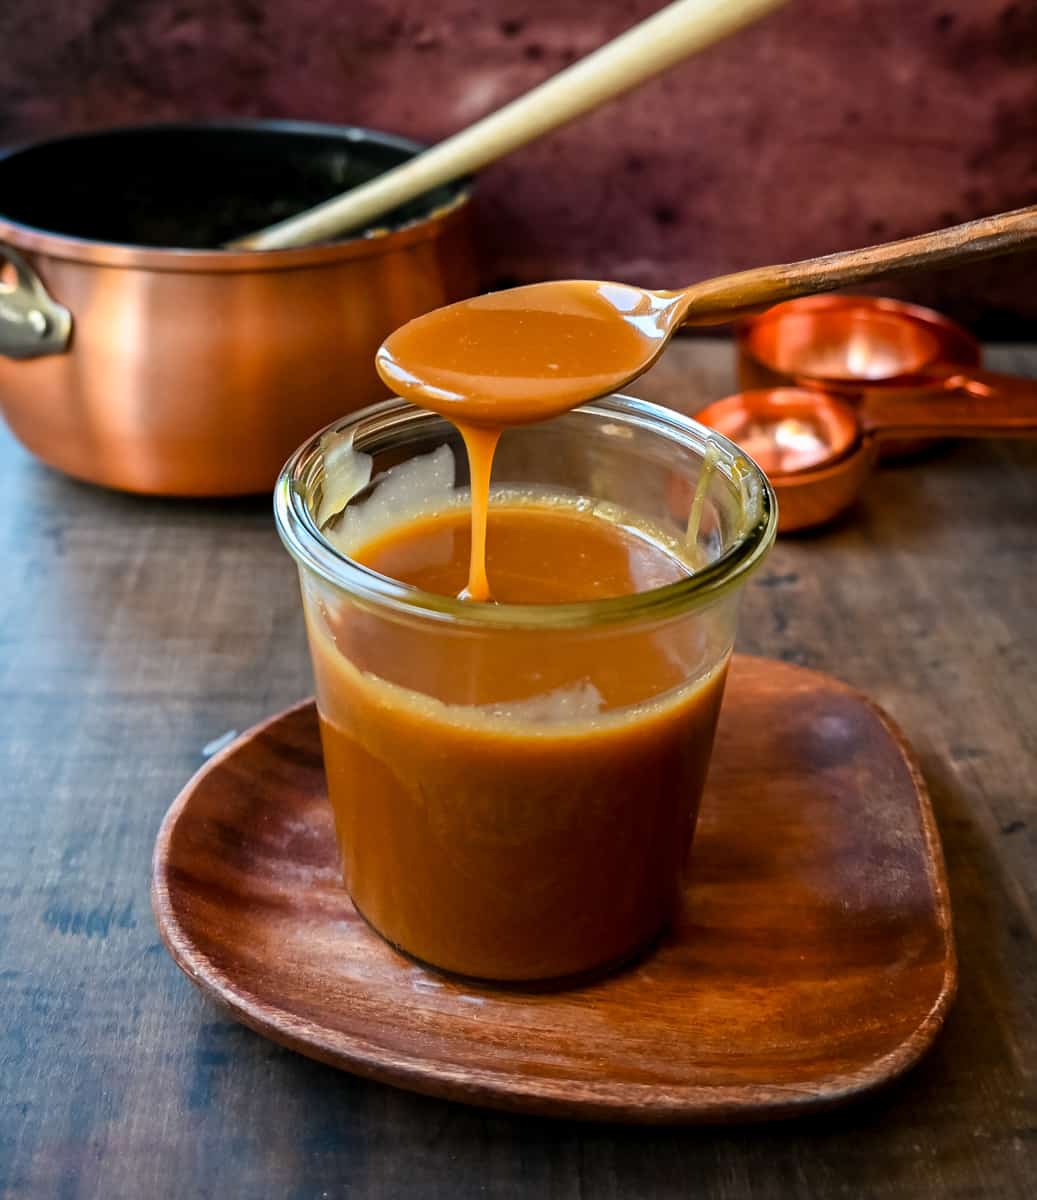 Easy Homemade Caramel Sauce. How to make rich, creamy homemade caramel sauce with only four ingredients and a foolproof method. This is the easiest, most delicious caramel sauce recipe!